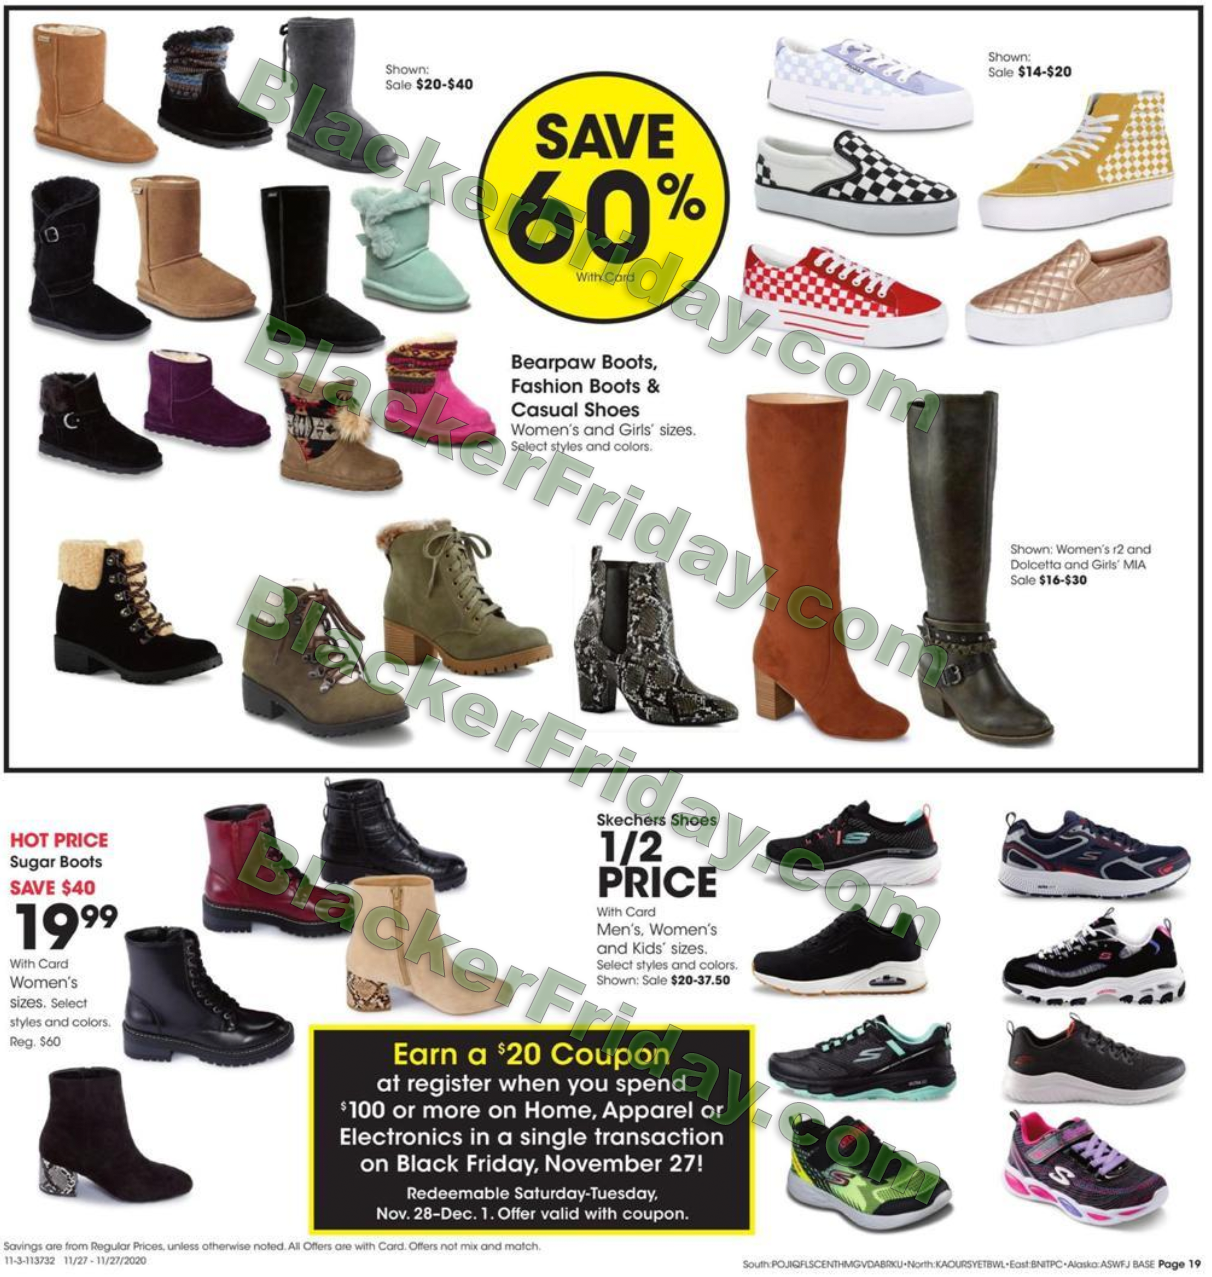 Fred Meyer Work Boots Online Sale, UP 